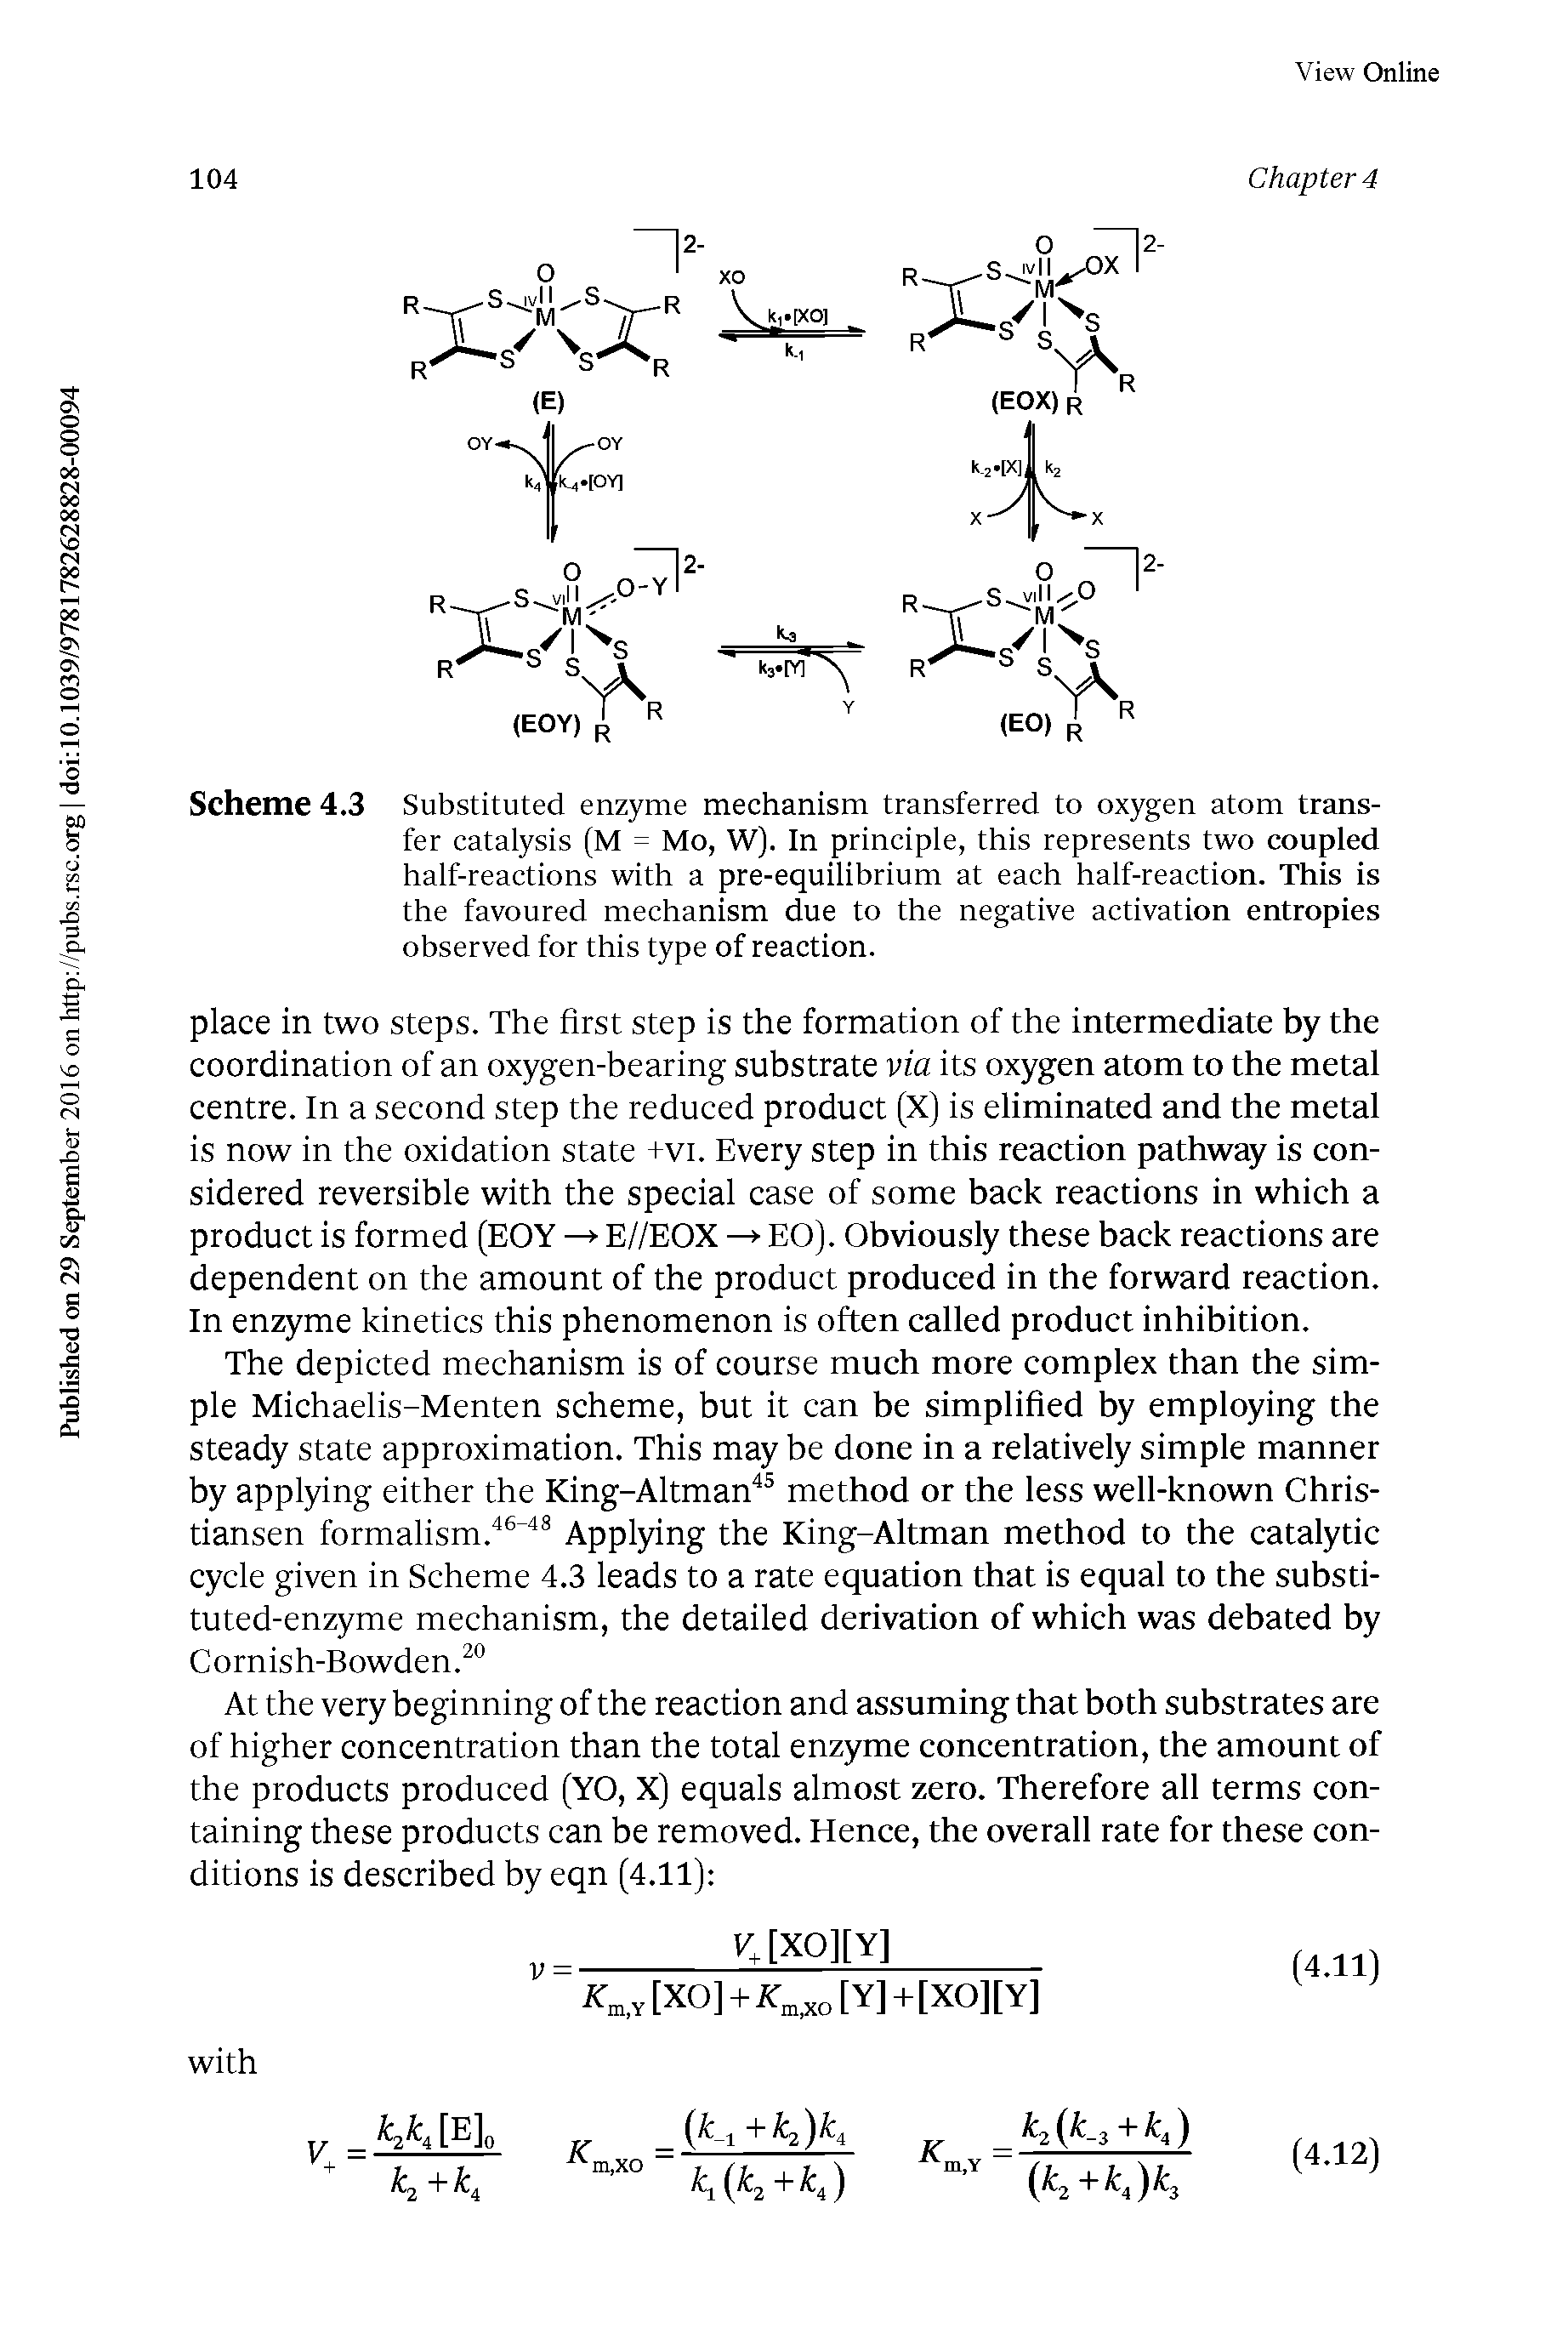 Scheme 4.3 Substituted enzyme mechanism transferred to oxygen atom transfer catalysis (M = Mo, W). In principle, this represents two coupled half-reactions with a pre-equilibrium at each half-reaction. This is the favoured mechanism due to the negative activation entropies observed for this type of reaction.